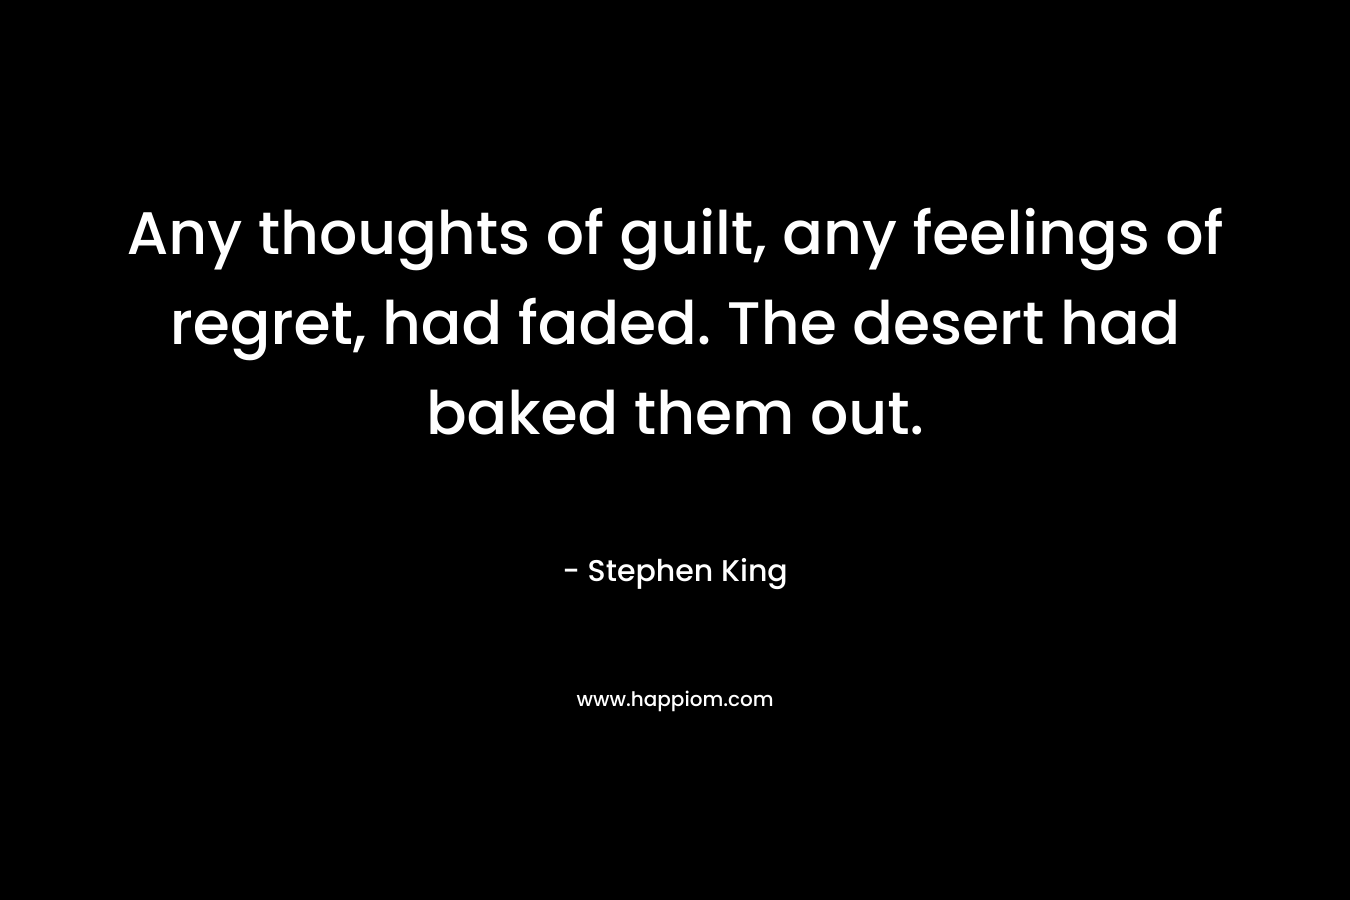 Any thoughts of guilt, any feelings of regret, had faded. The desert had baked them out. – Stephen King